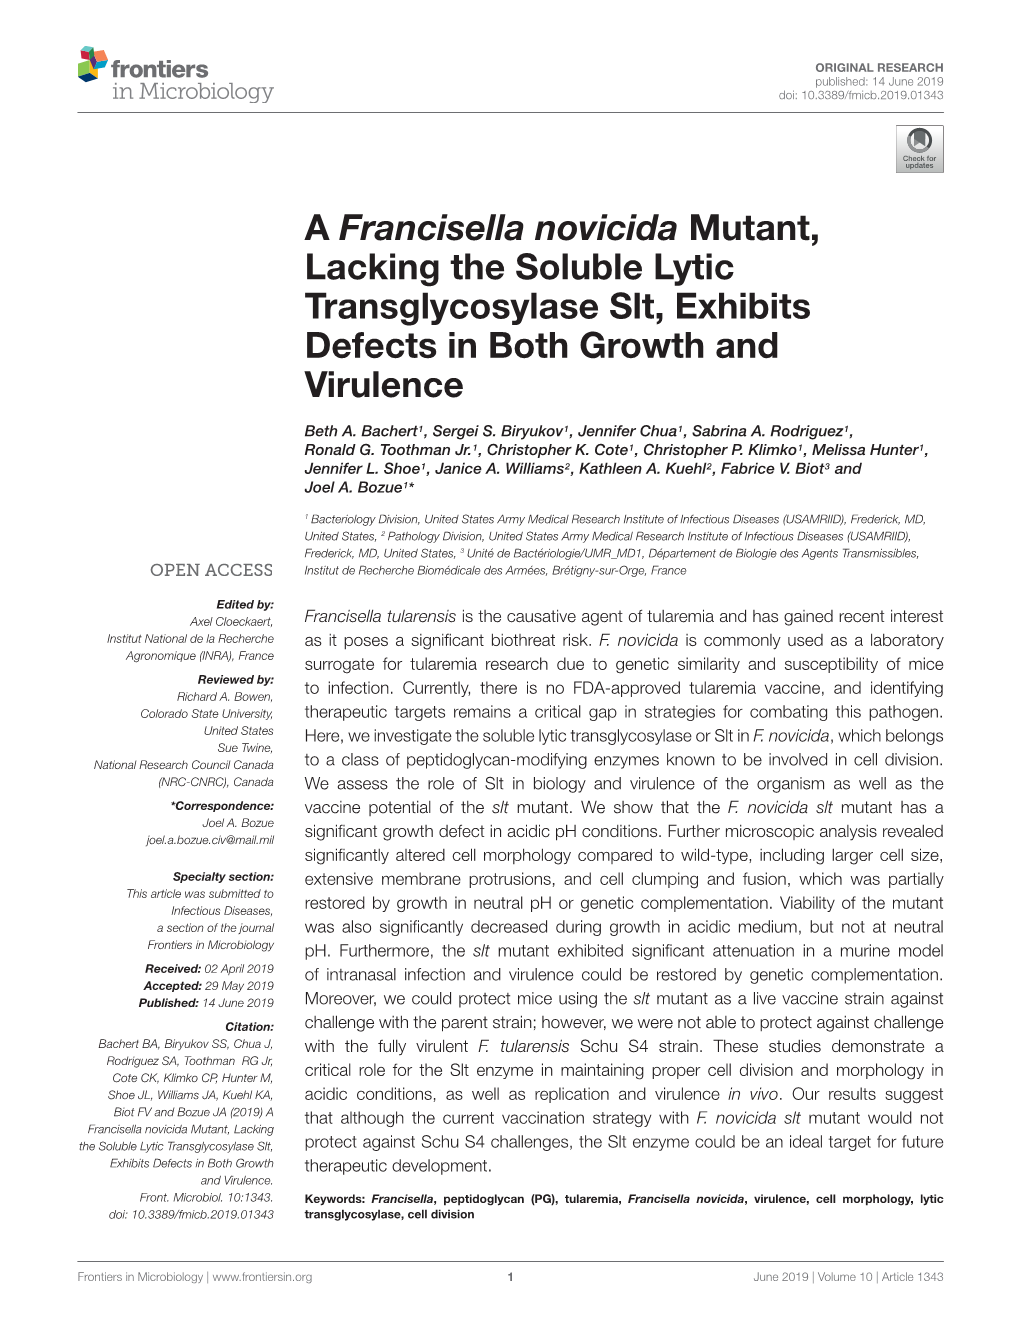 A Francisella Novicida Mutant, Lacking the Soluble Lytic Transglycosylase Slt, Exhibits Defects in Both Growth and Virulence